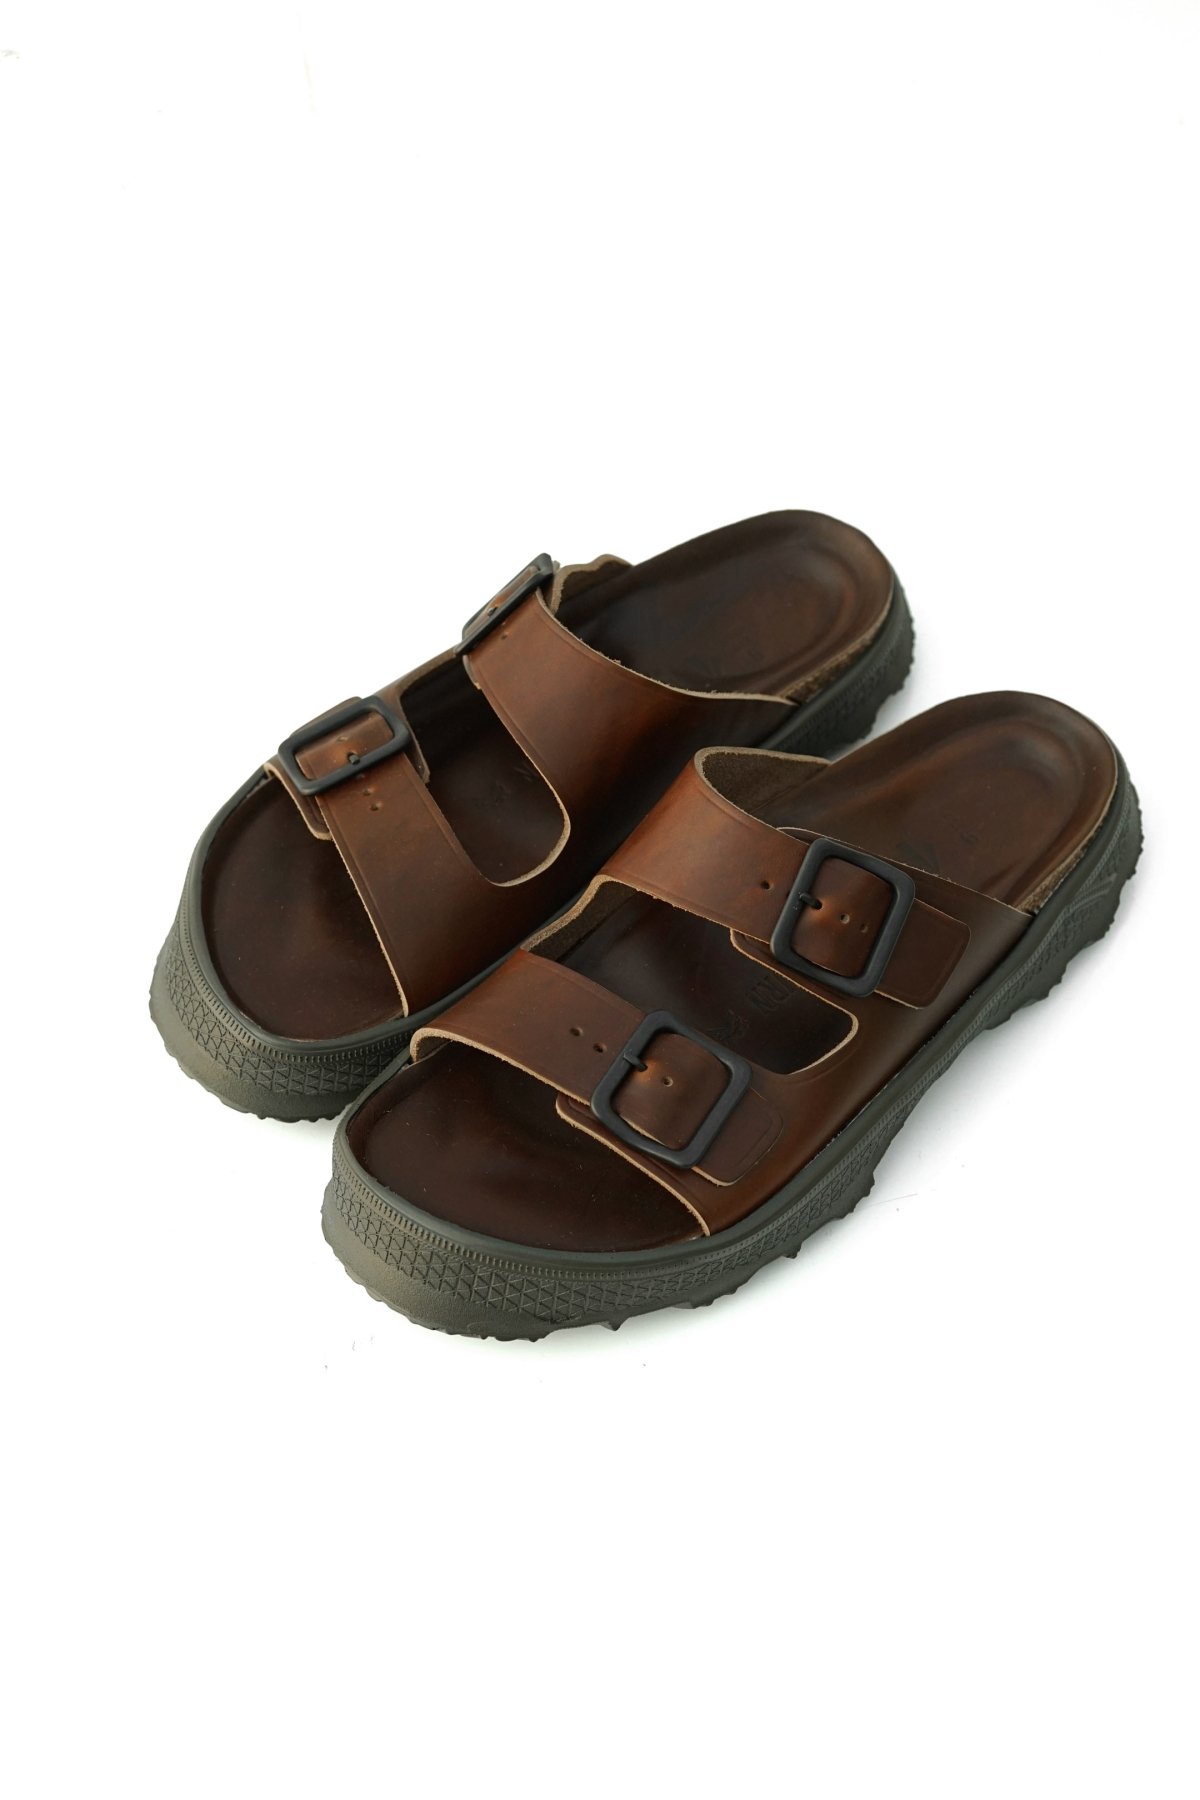 ◯ Nigel Cabourn - LEATHER SANDAL - PEAT LABEL - BROWN ナイジェル